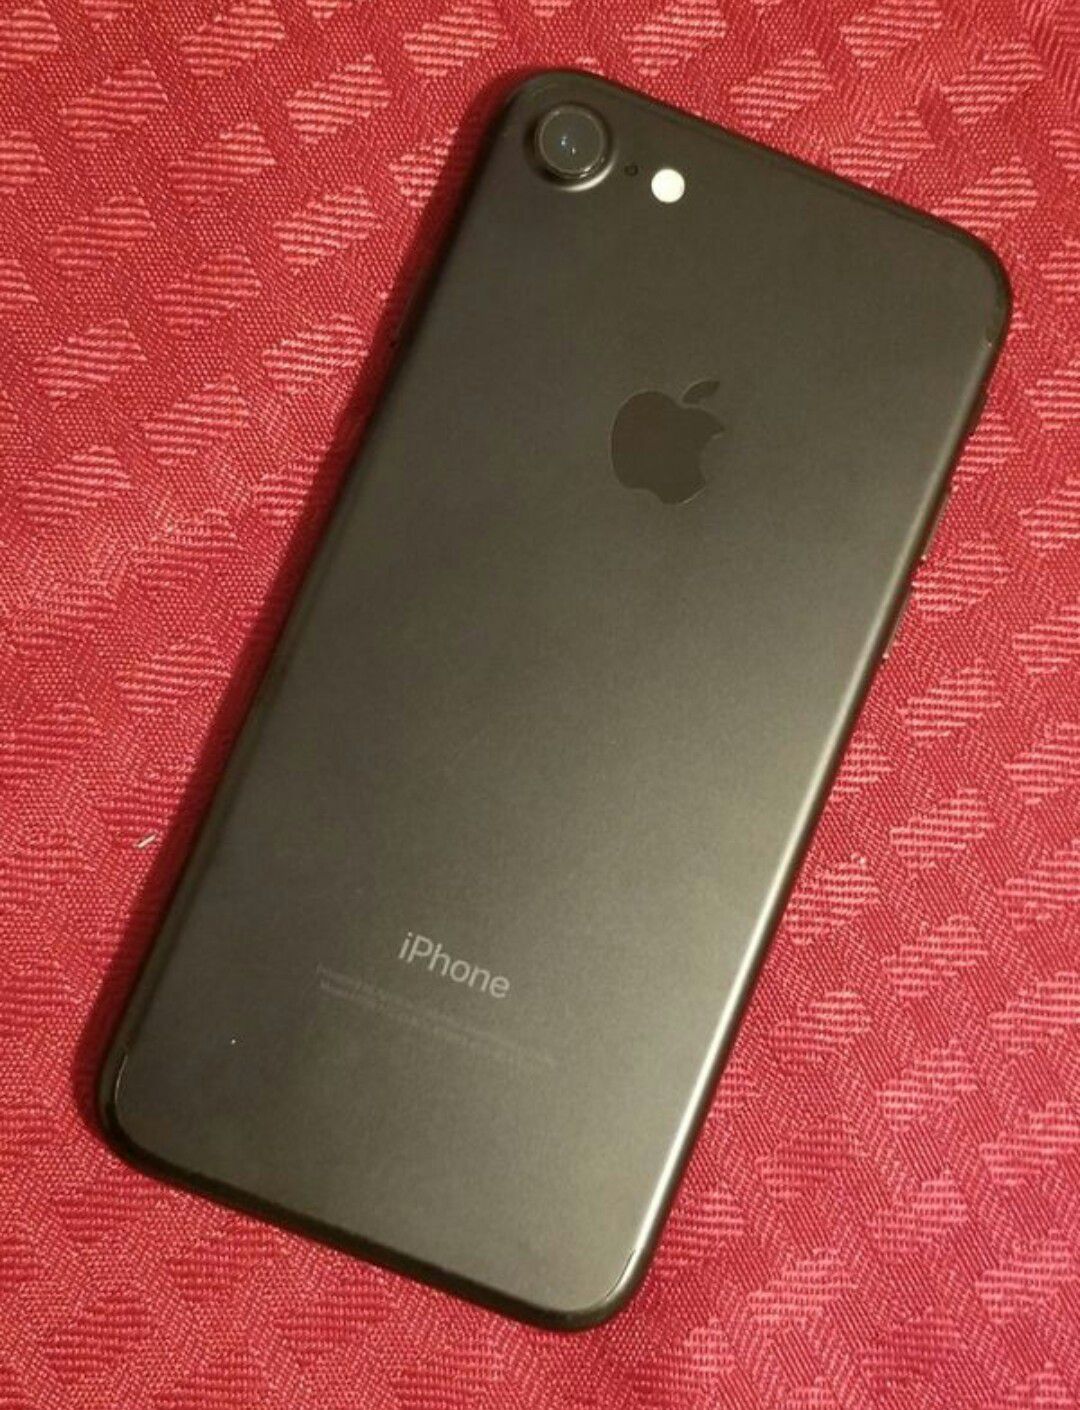 IPhone 7, Unlocked, Great Condition. (Almost new)